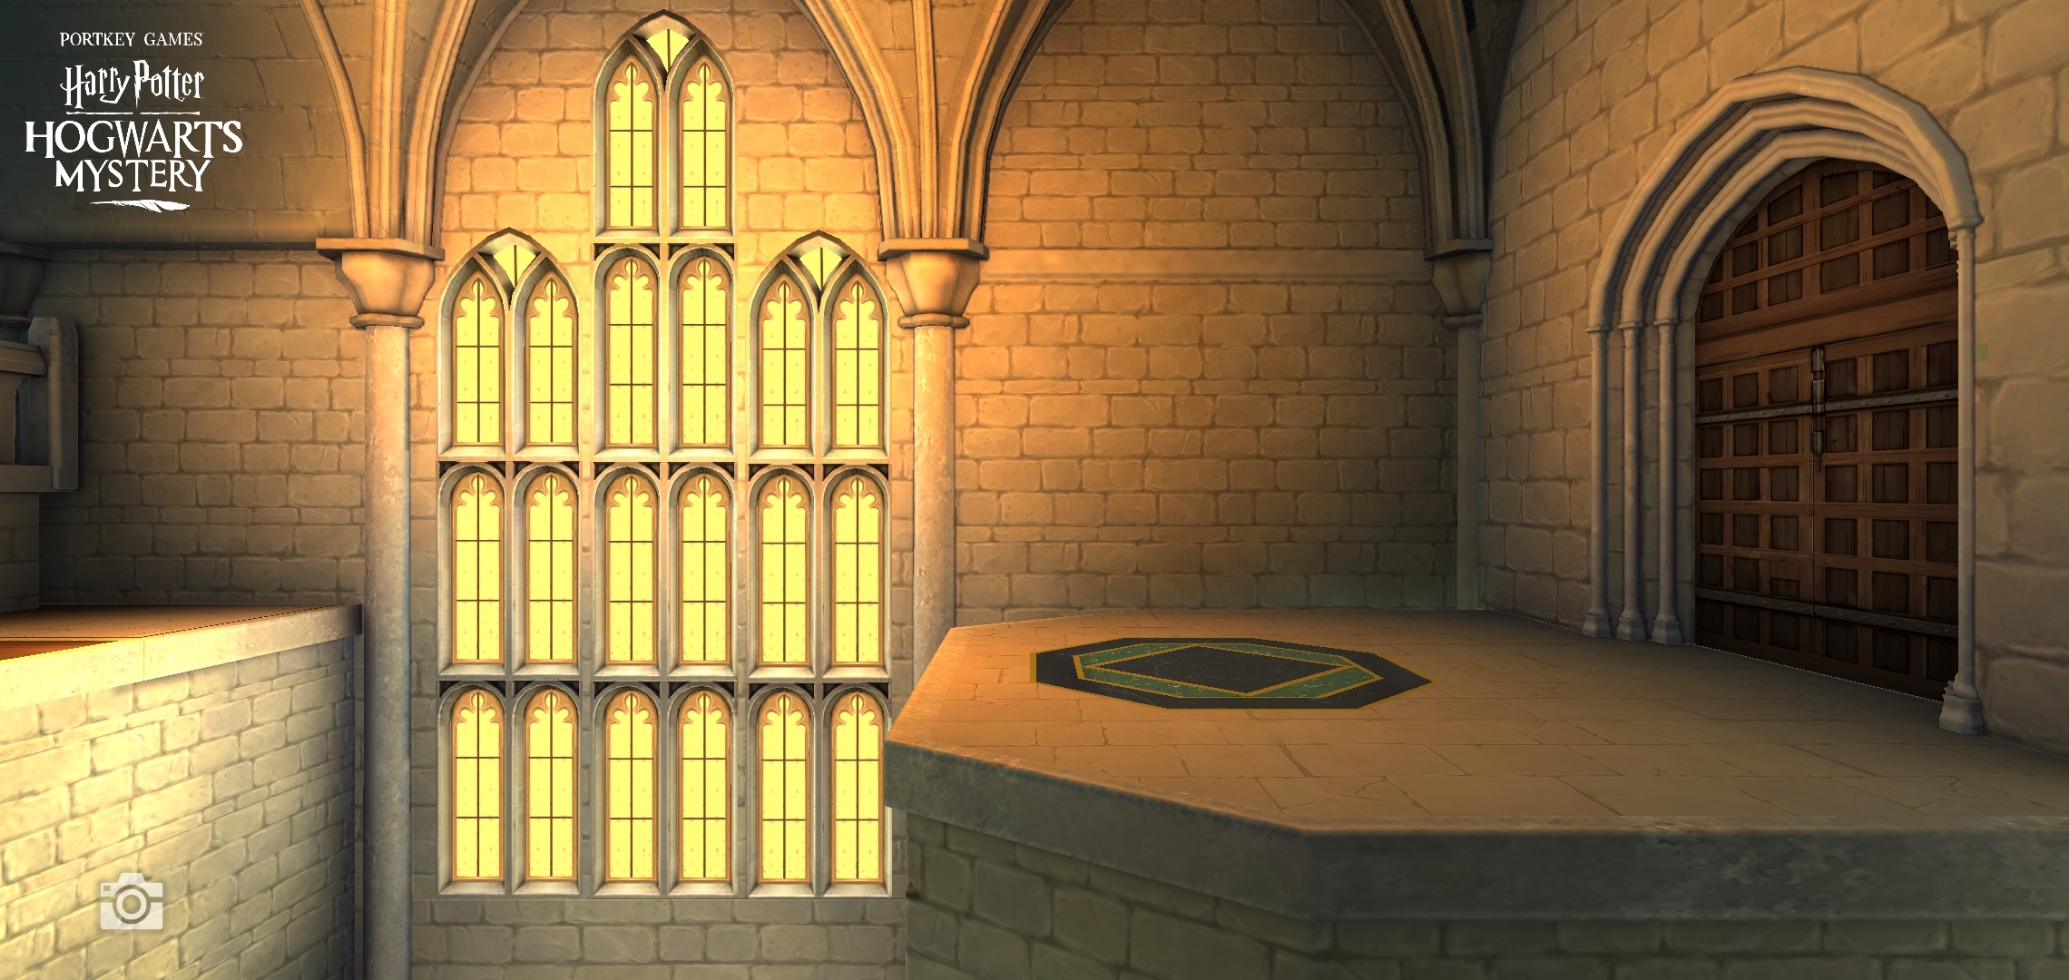 Pictured is a view of the Dragon Clubhouse in “Hogwarts Mystery”.